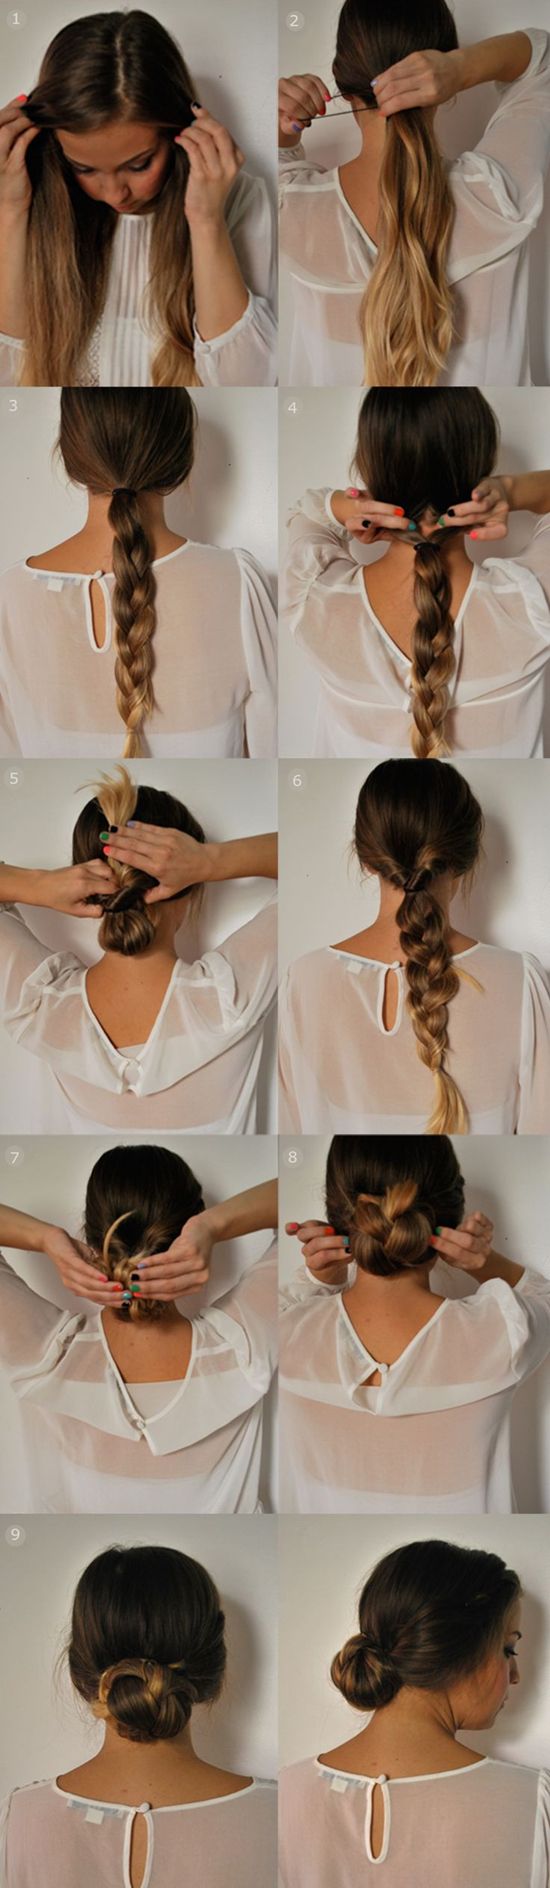 32 Chic 5 Minute Hairstyles Tutorials You May Love Styles